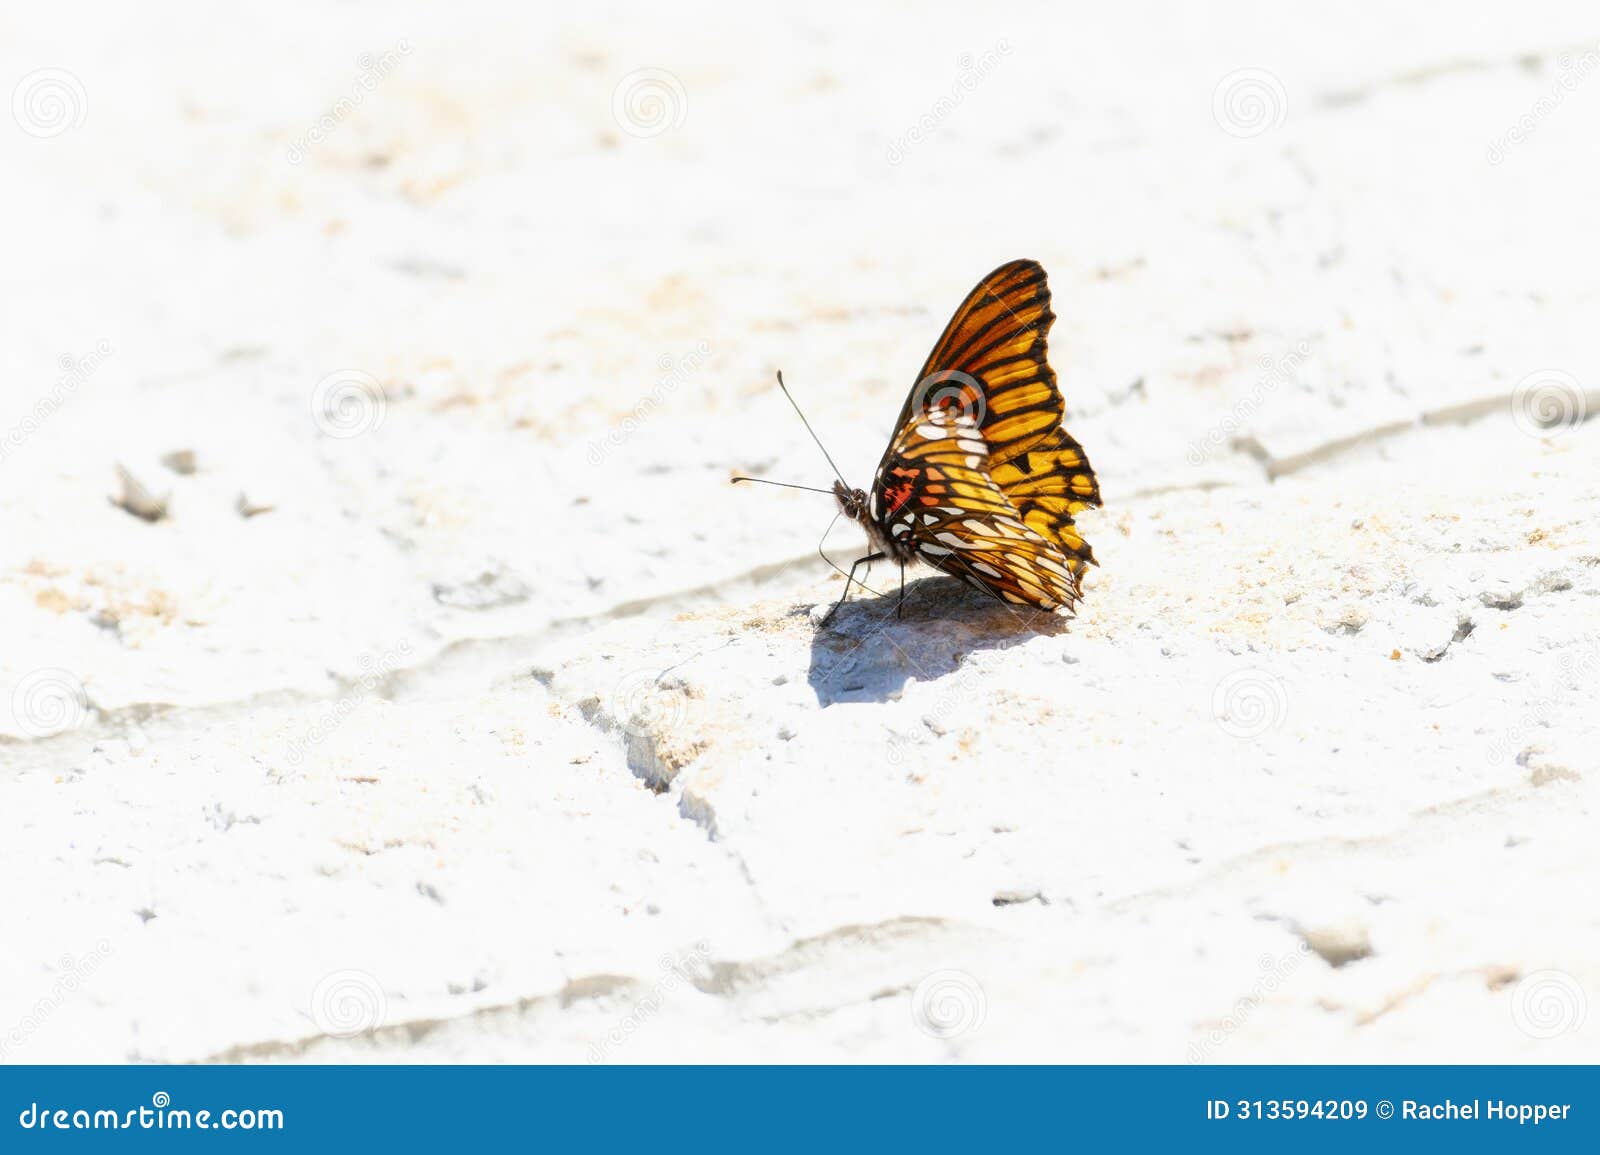 a mexican silverspot butterfly, dione moneta, butterfly, perched on the ground in mexico